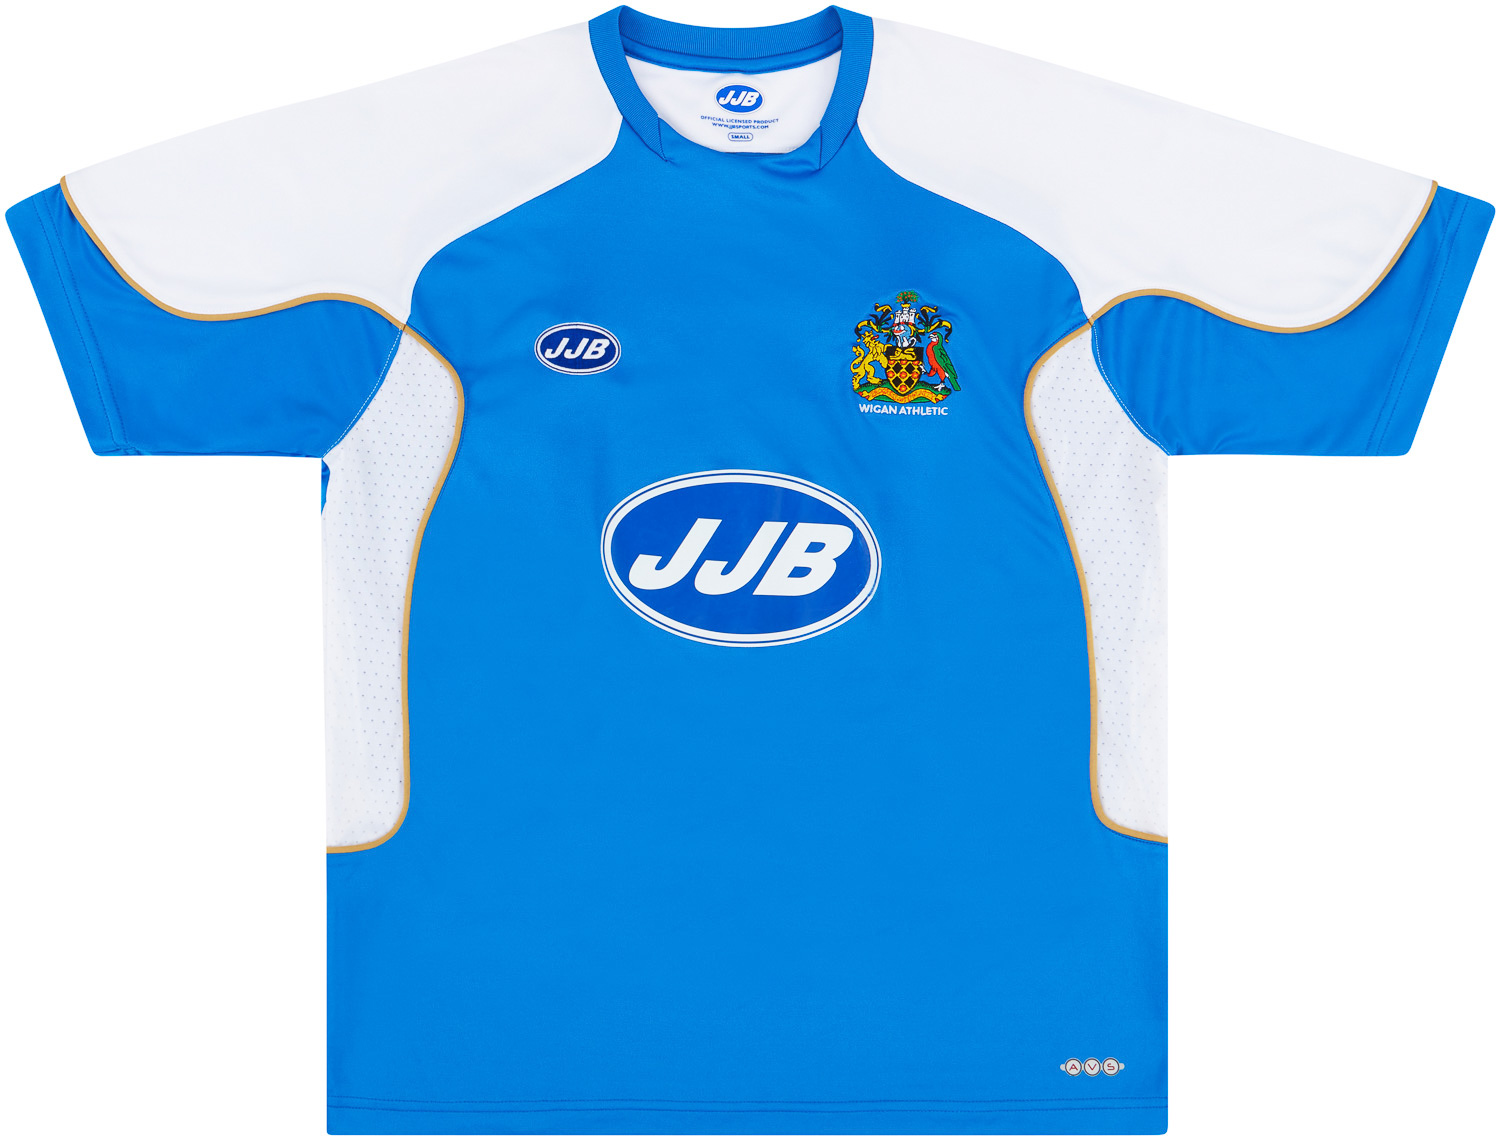 2006-07 Wigan Athletic Home Shirt